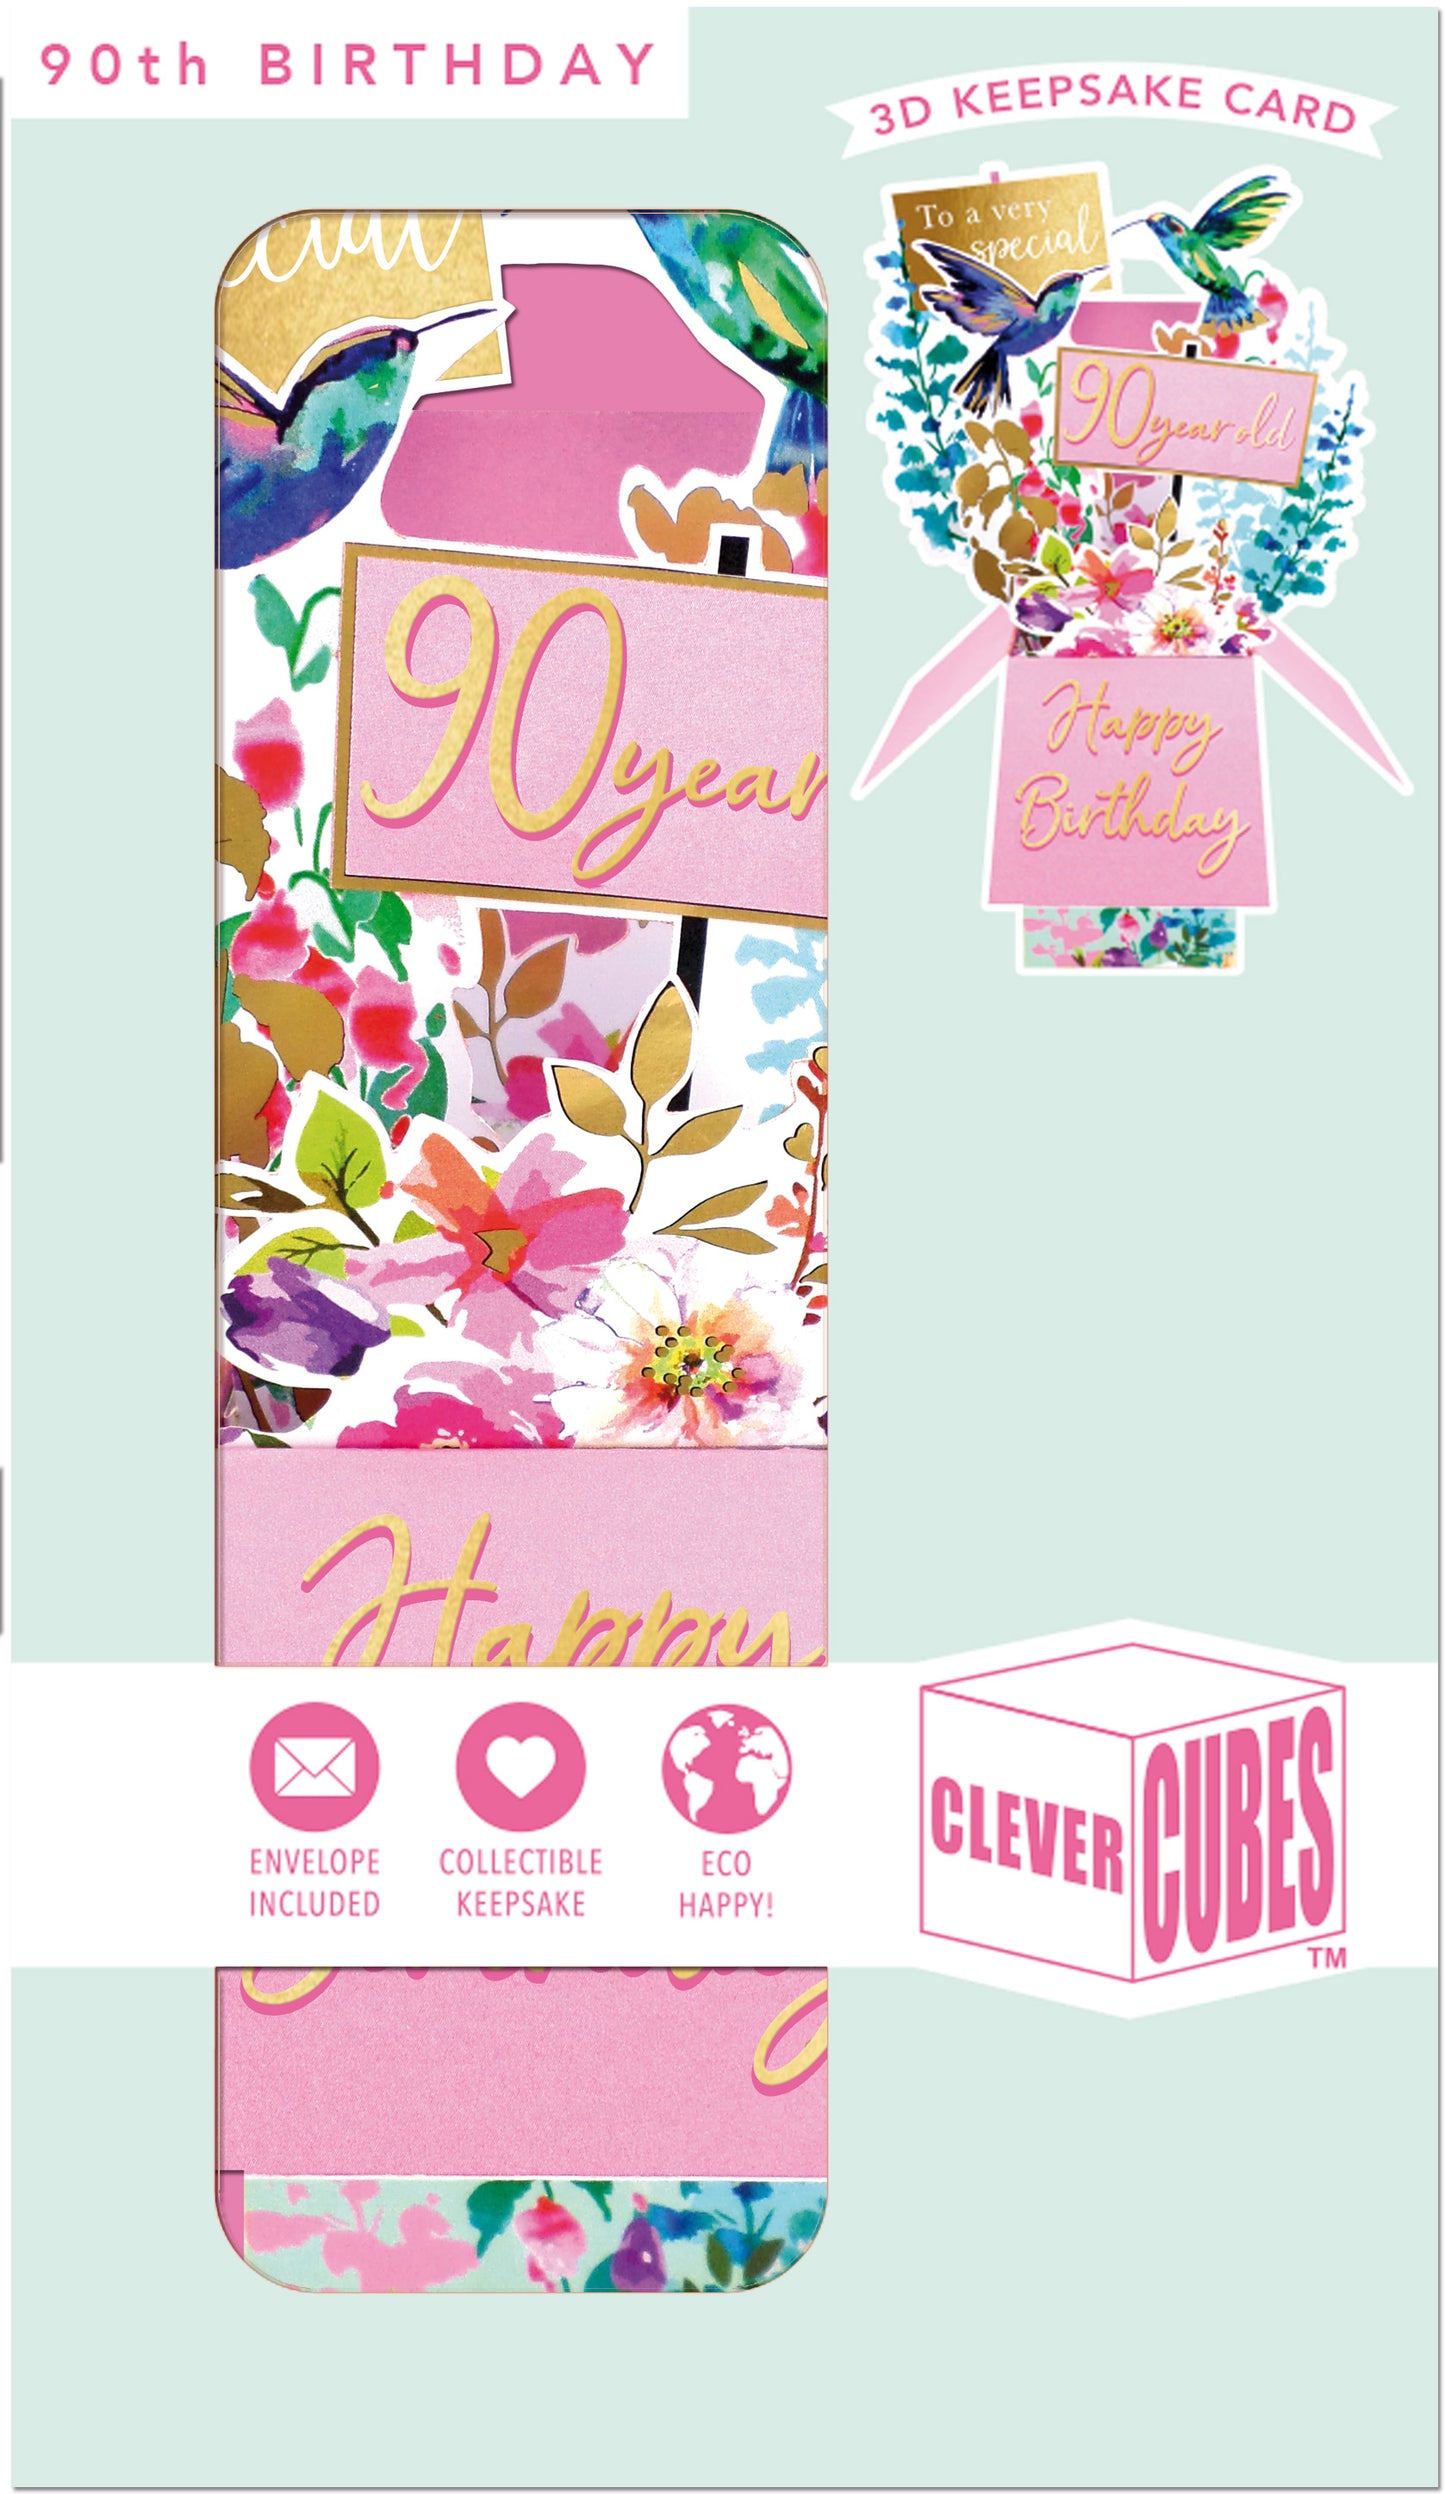 Clever Cube 90th Birthday For Her Joyful 90th! Birthday Pop Up Greeting Card